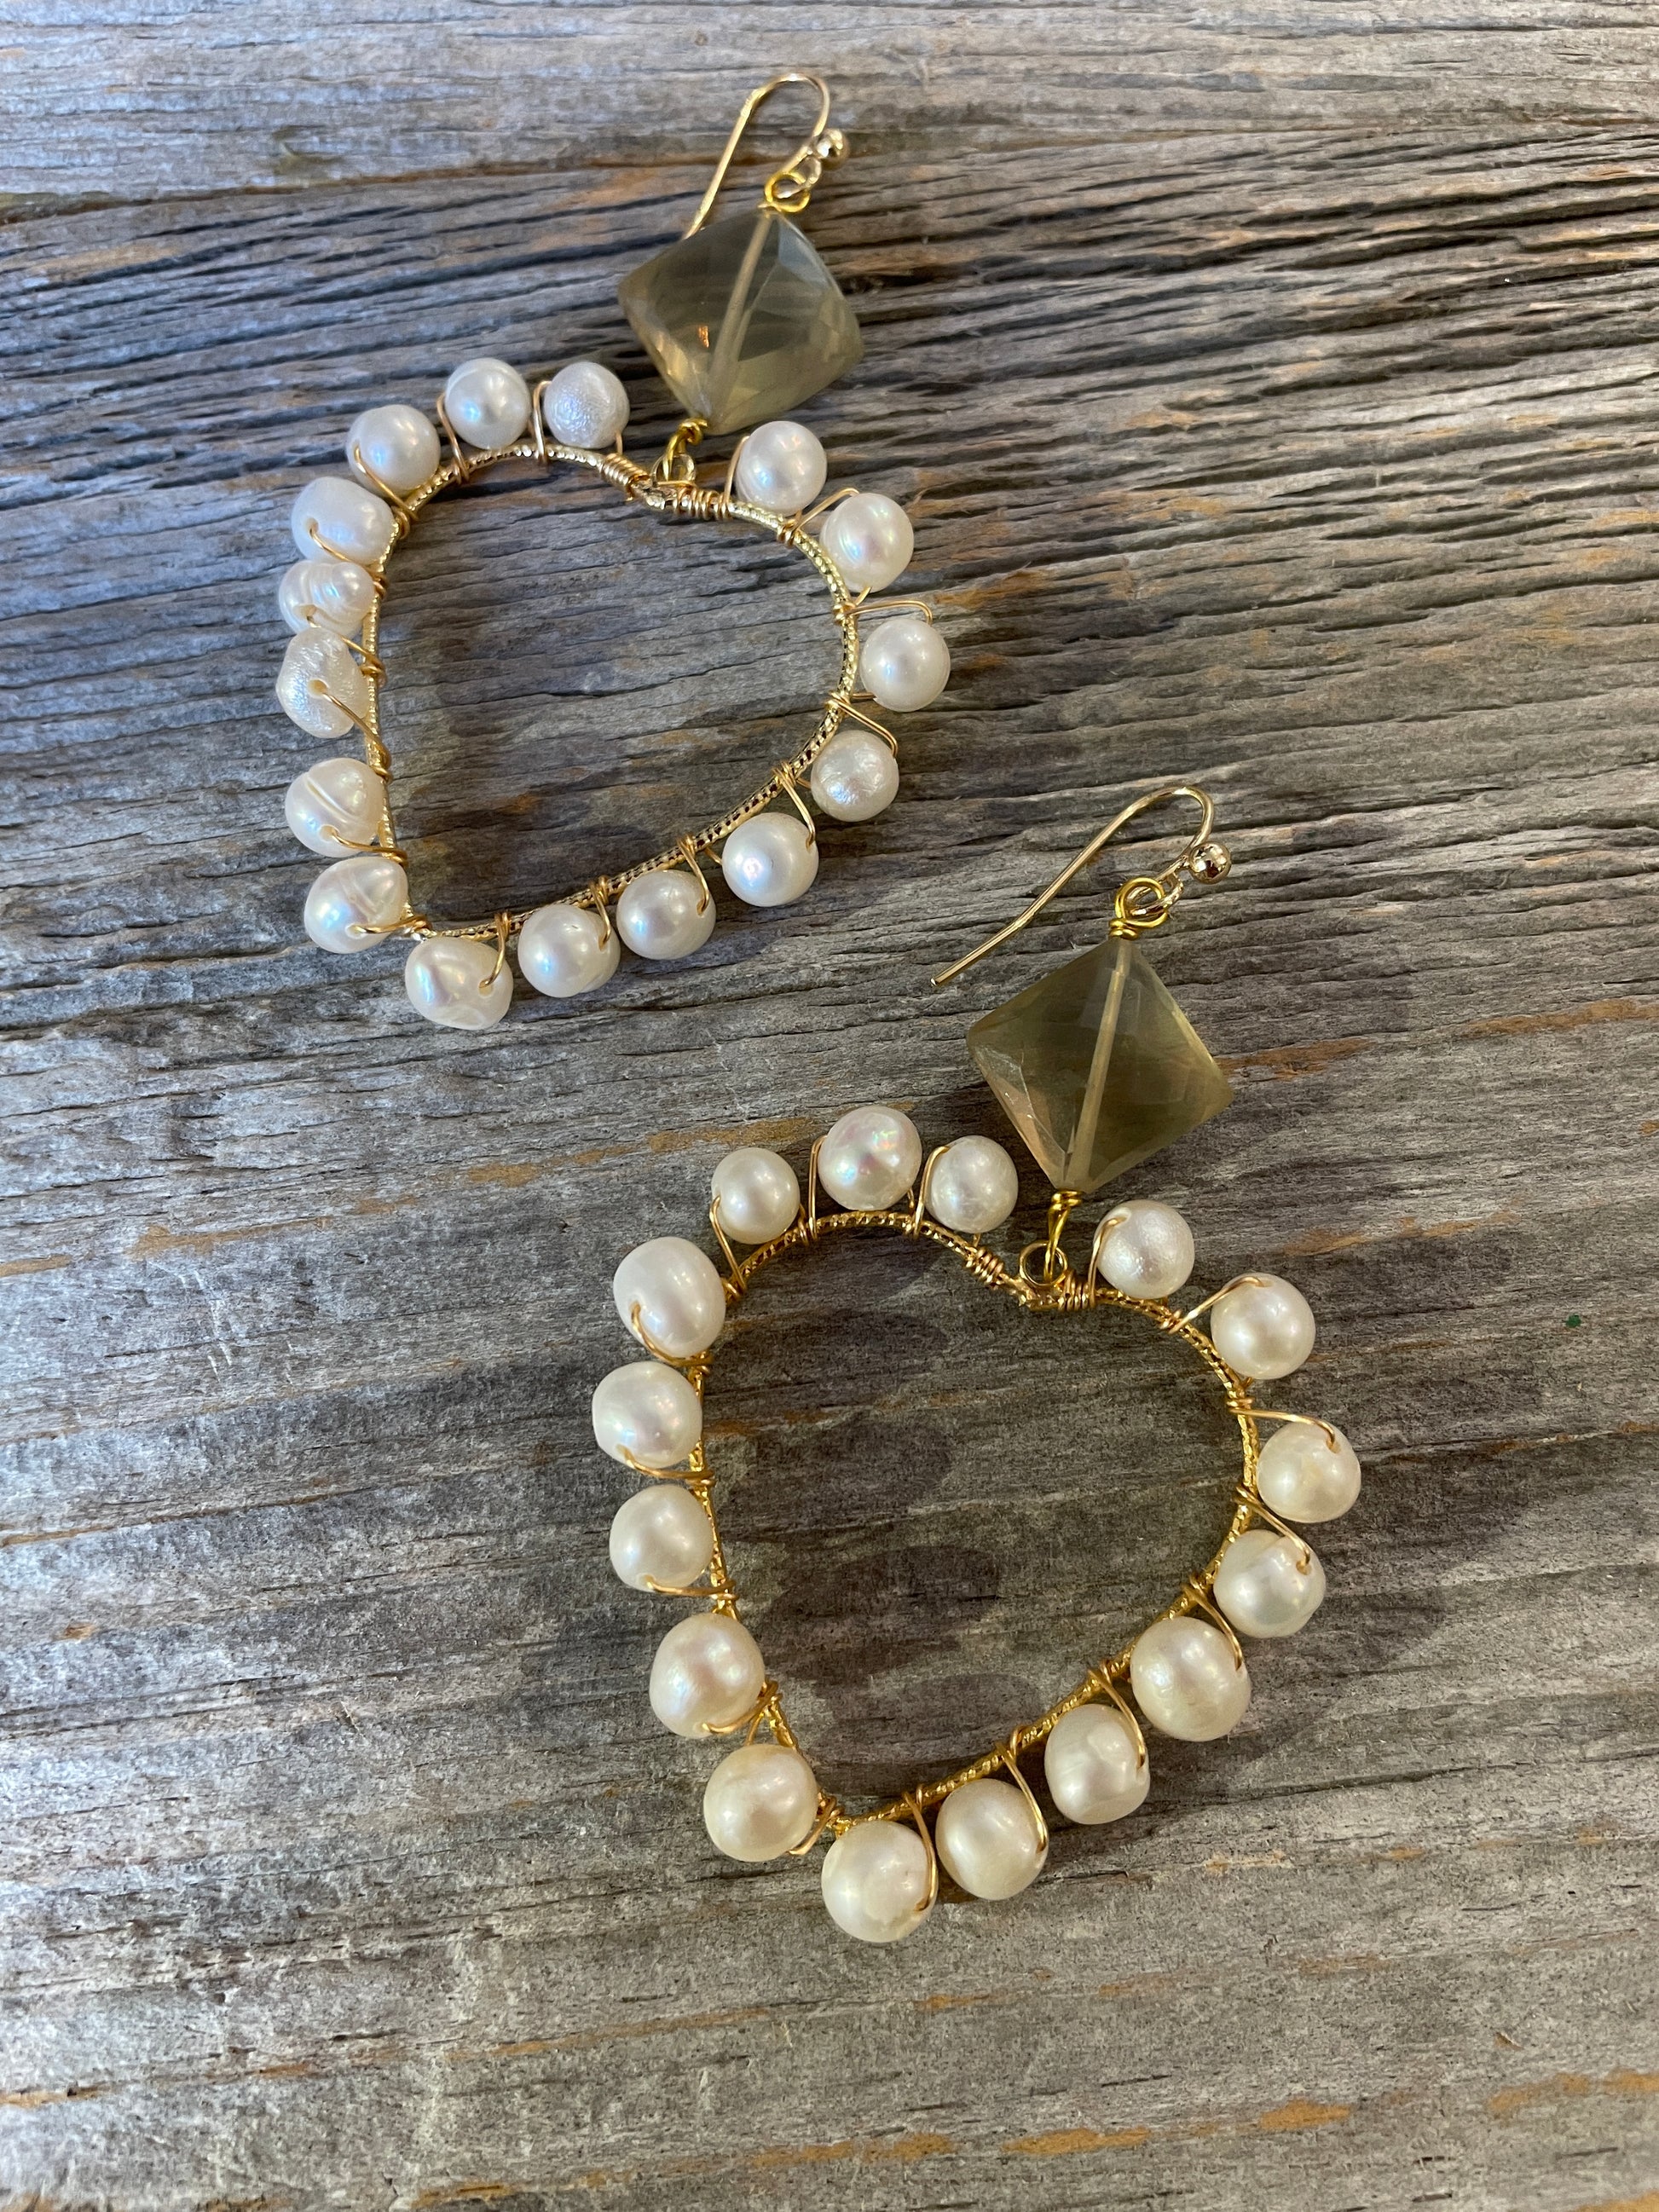 Handmade Gold drop hearts with pearl detail with faceted semi precious lemon quartz